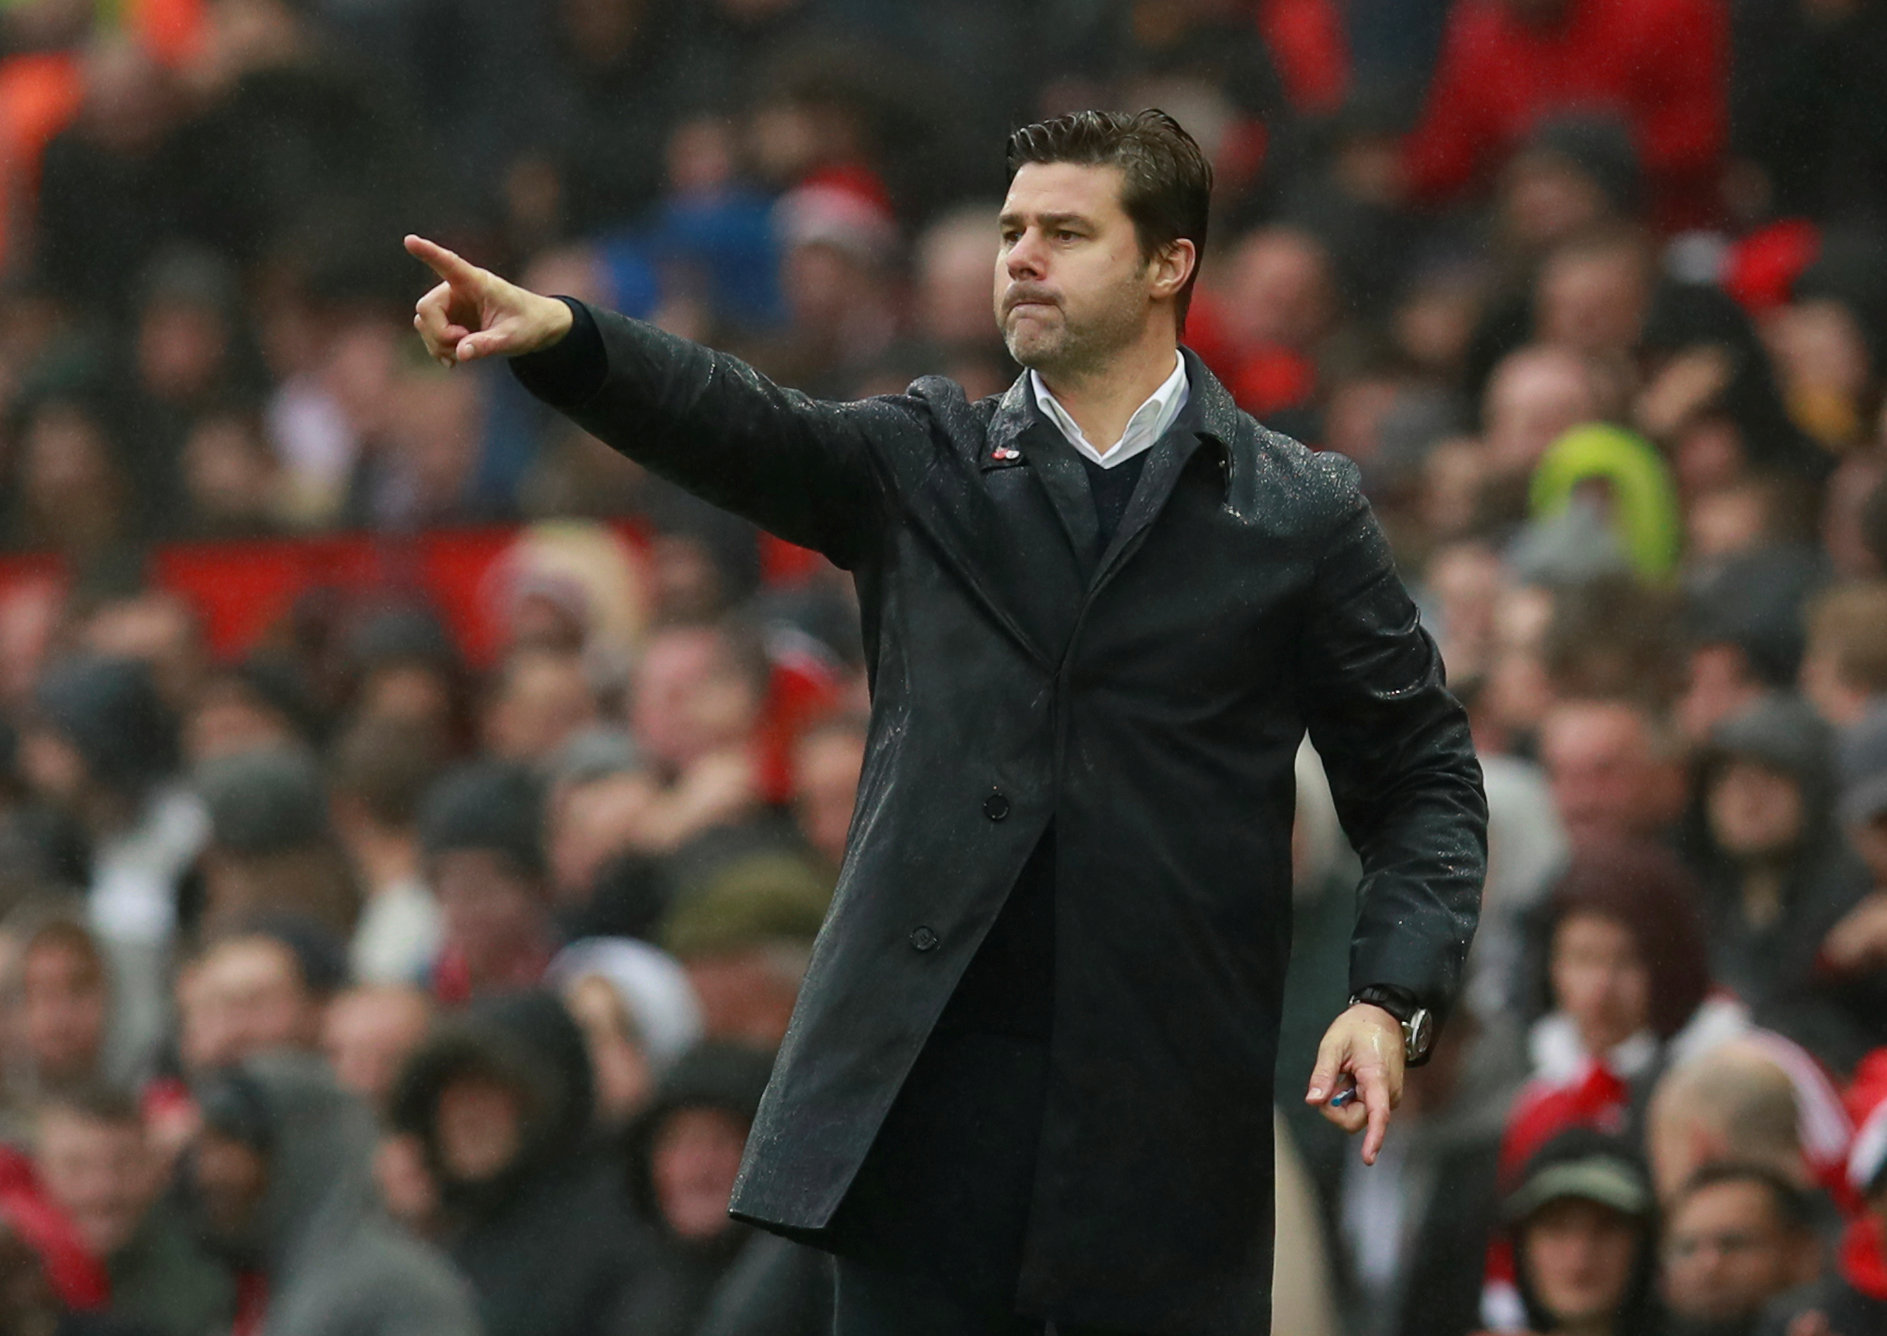 Football: Kane absence no excuse for Spurs loss, says Pochettino